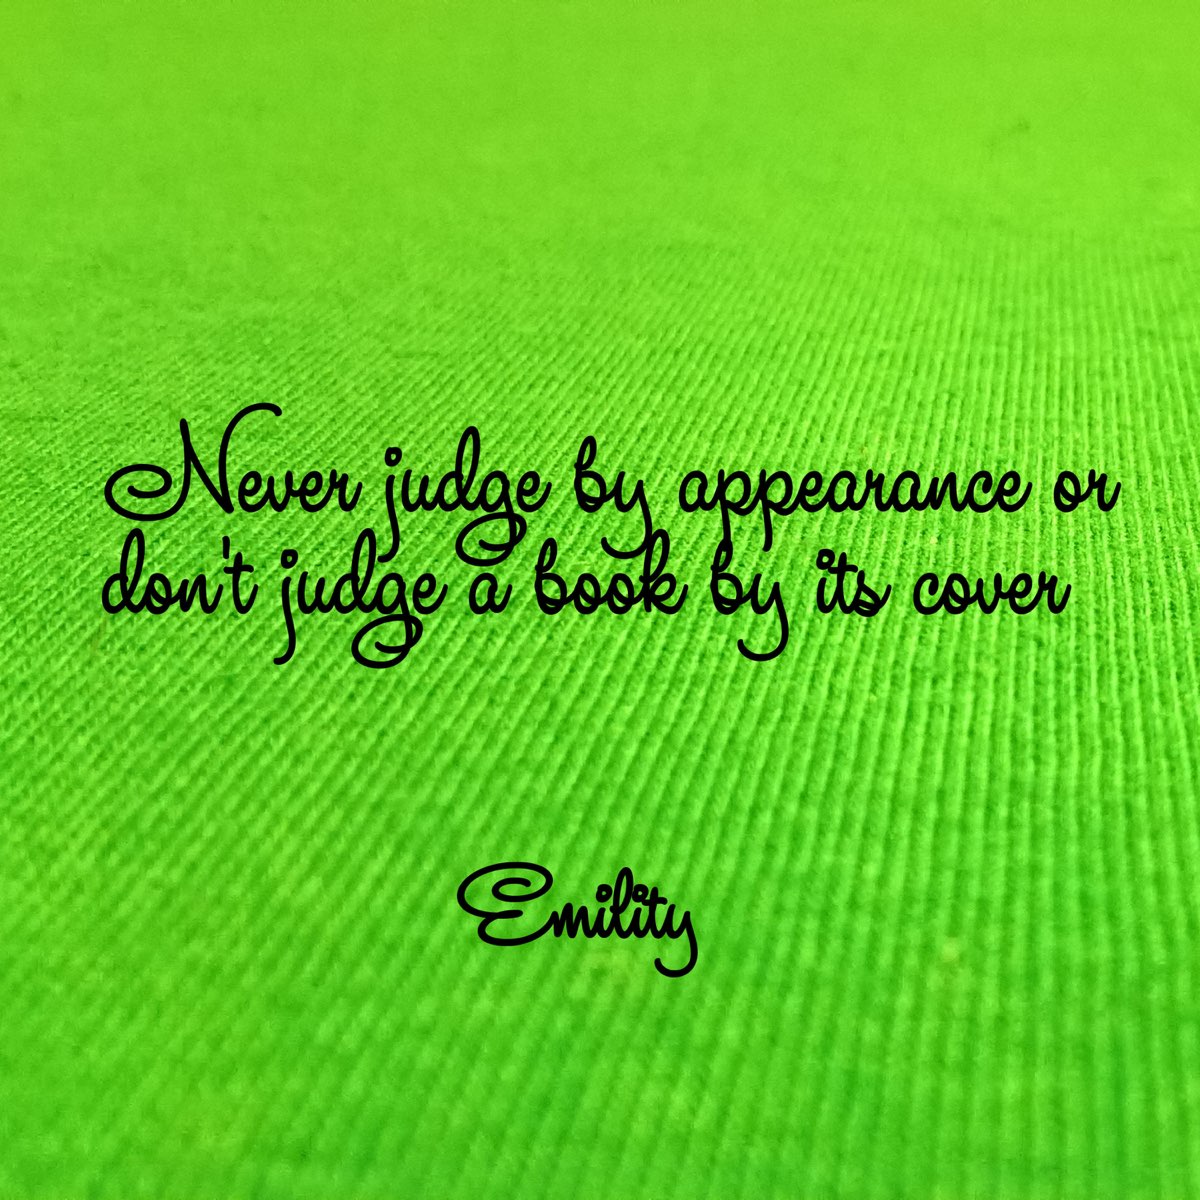 essay on never judge anyone by appearance